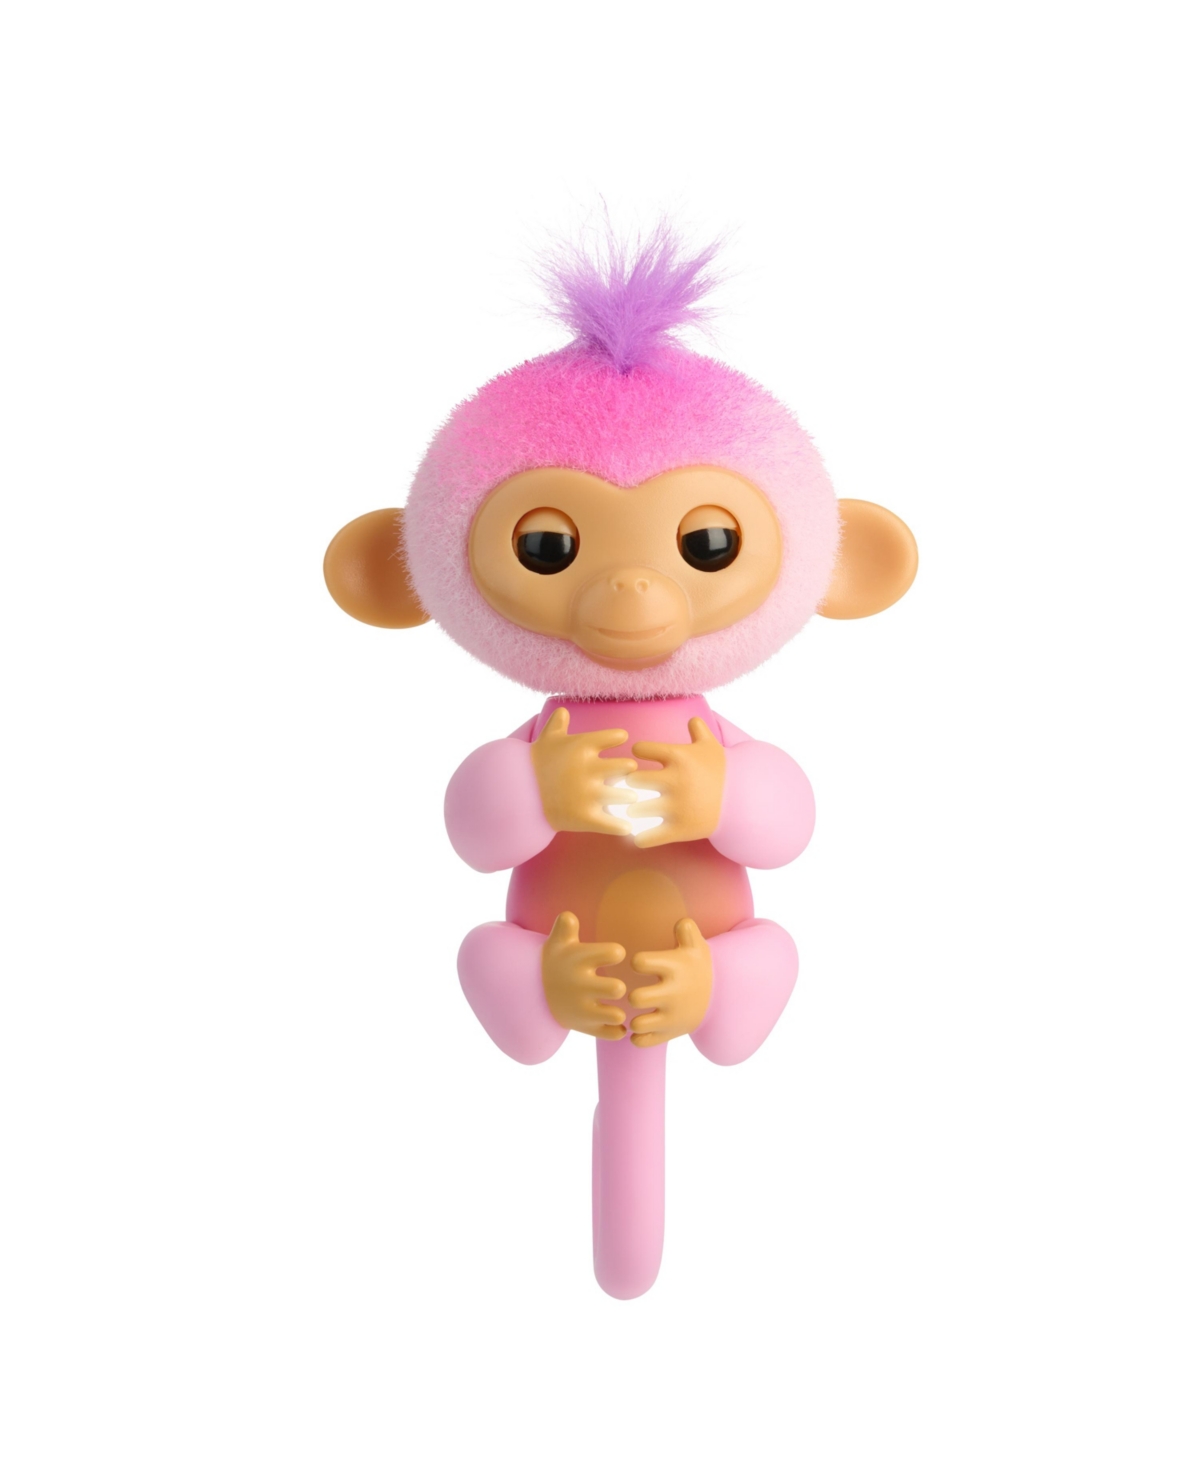 Fingerlings Interactive Baby Monkey Reacts To Touch – 70+ Sounds & Reactions, Harmony In No Color